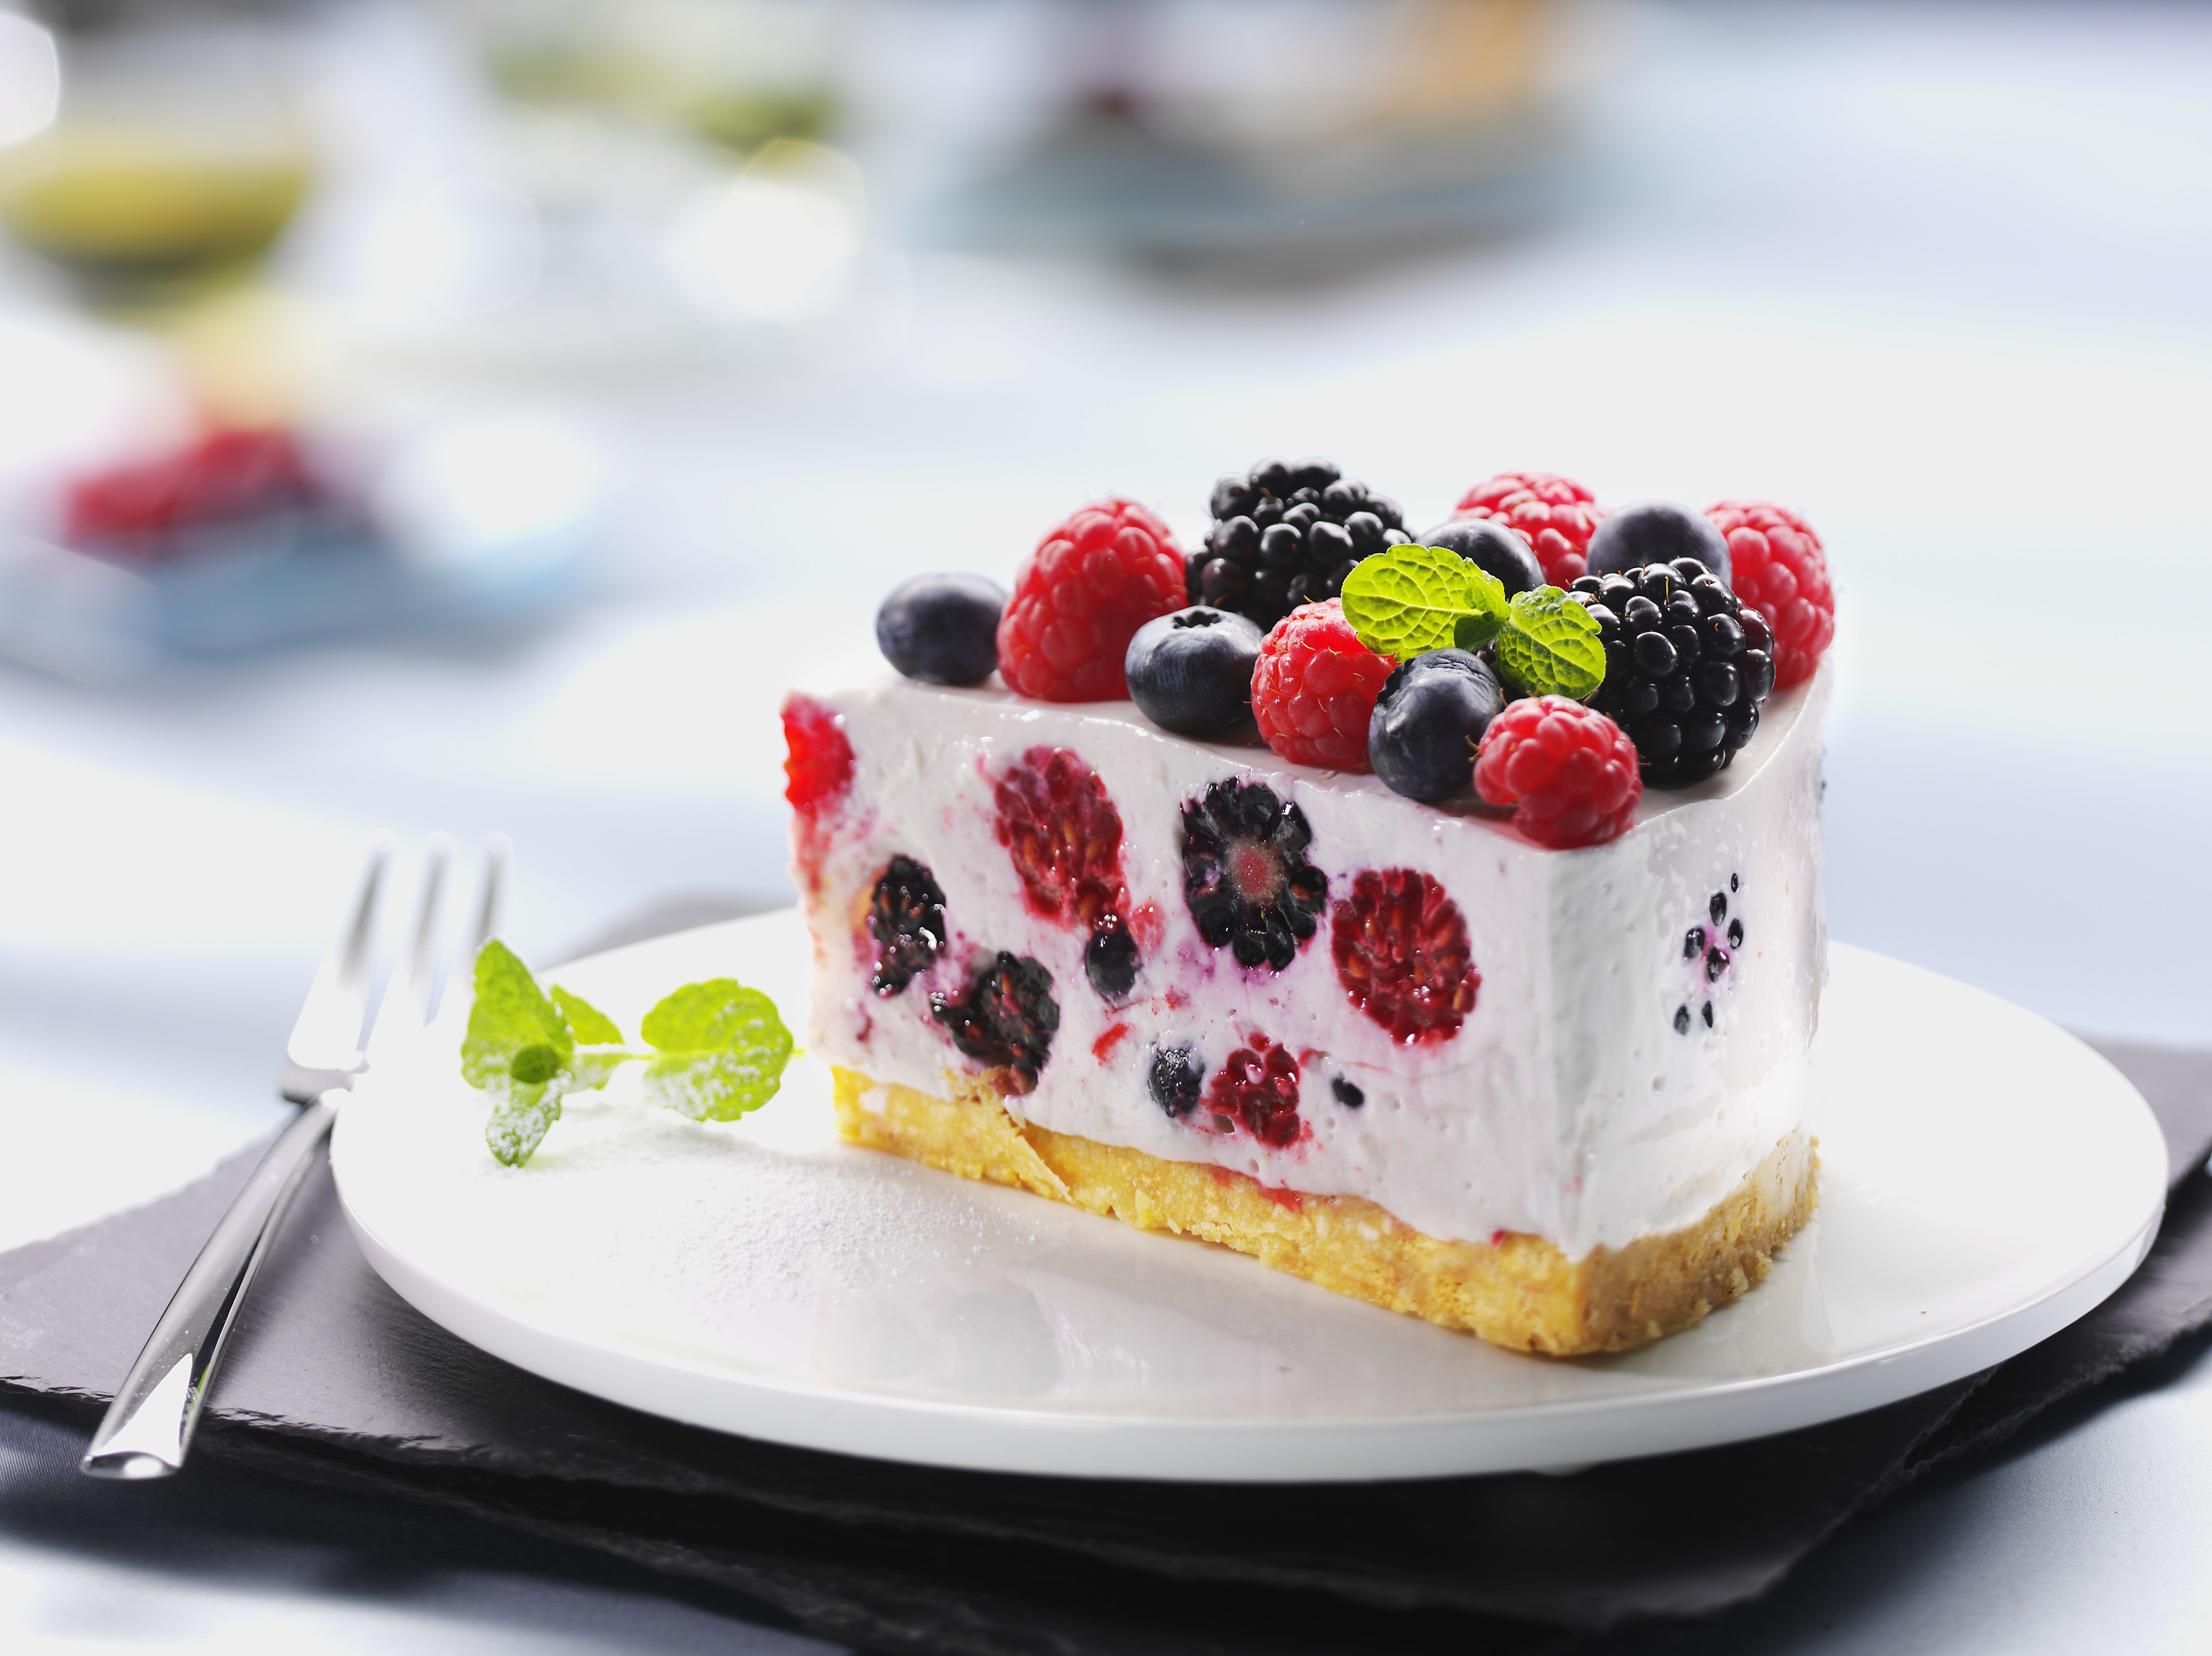 raspberry, food, fruits, cake, desert, bilberries, sweet, black currant, blackcurrant, cream for android